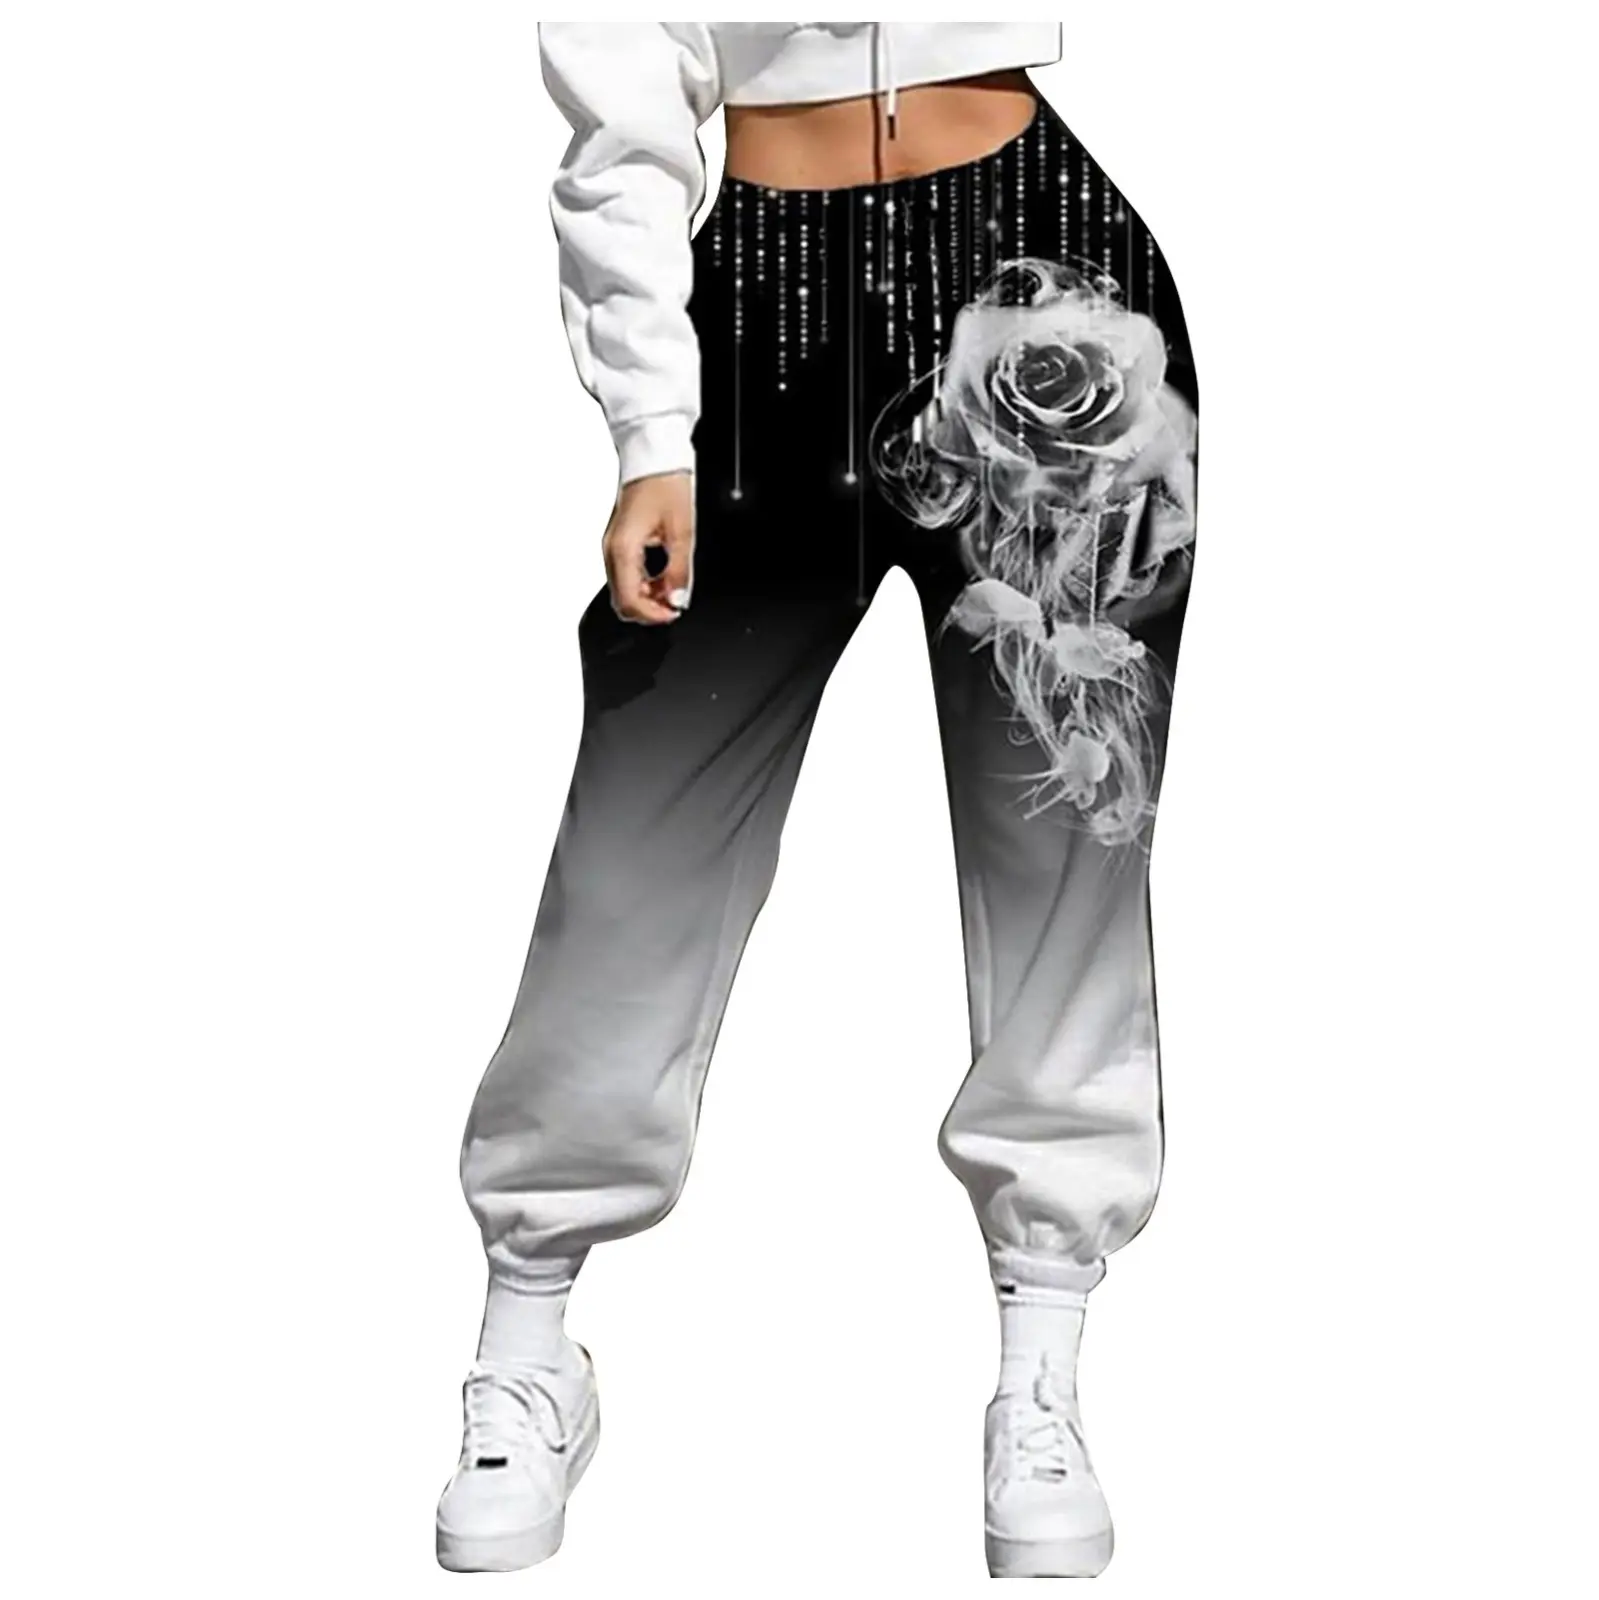 Manufacturer Flower Printed Pants For Ladies Workout Casual Pants For Women